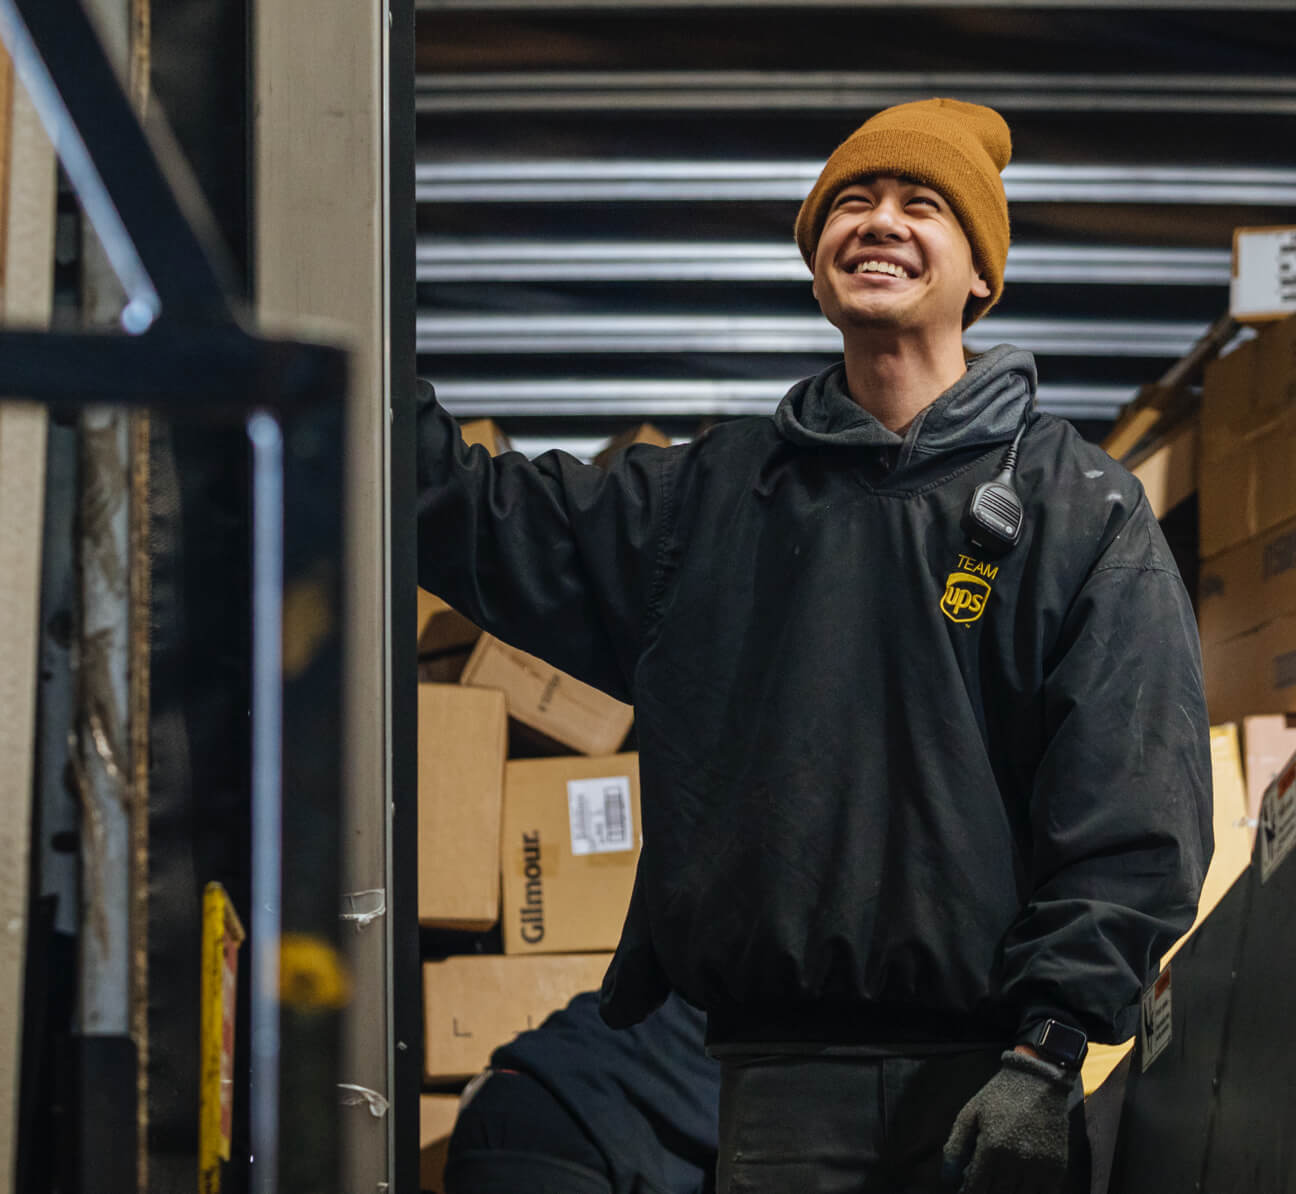 Employee smiling inside back of delivery semi